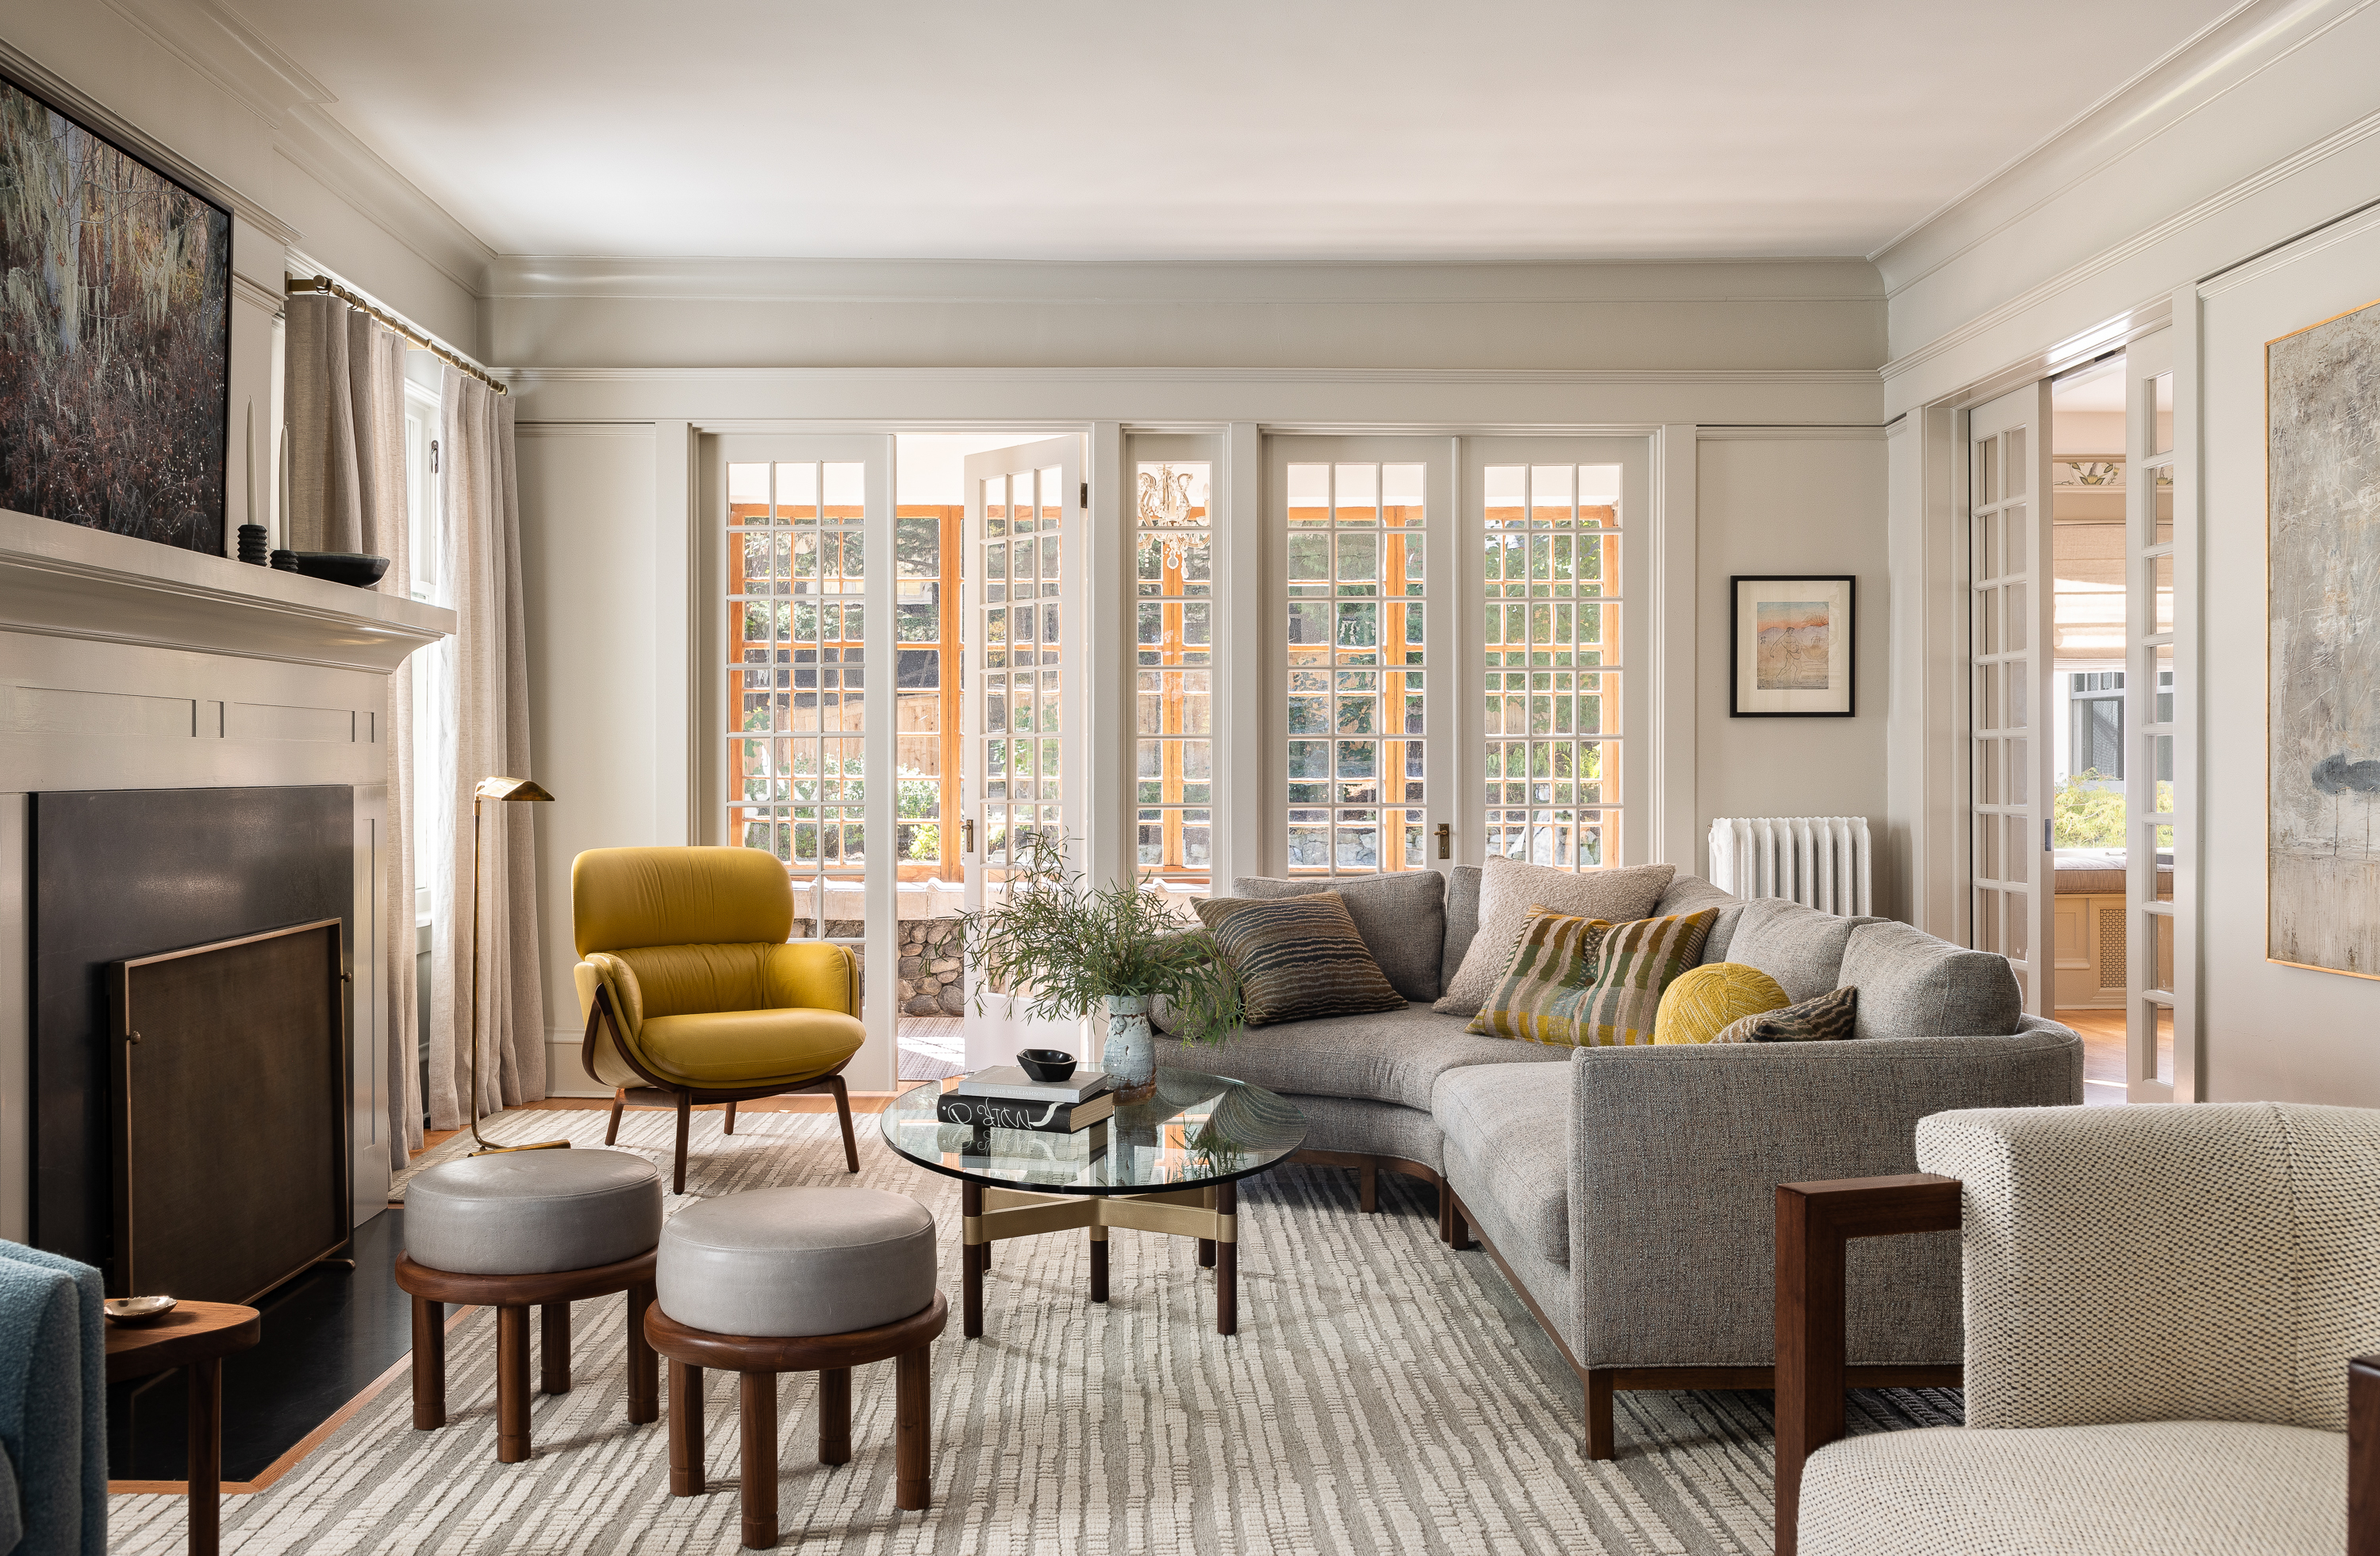 The living room features warm gray walls, contemporary furniture, and lighting for both formal and inviting ambience. Textures like leather, wool, and linen complement a hand-woven wool rug.